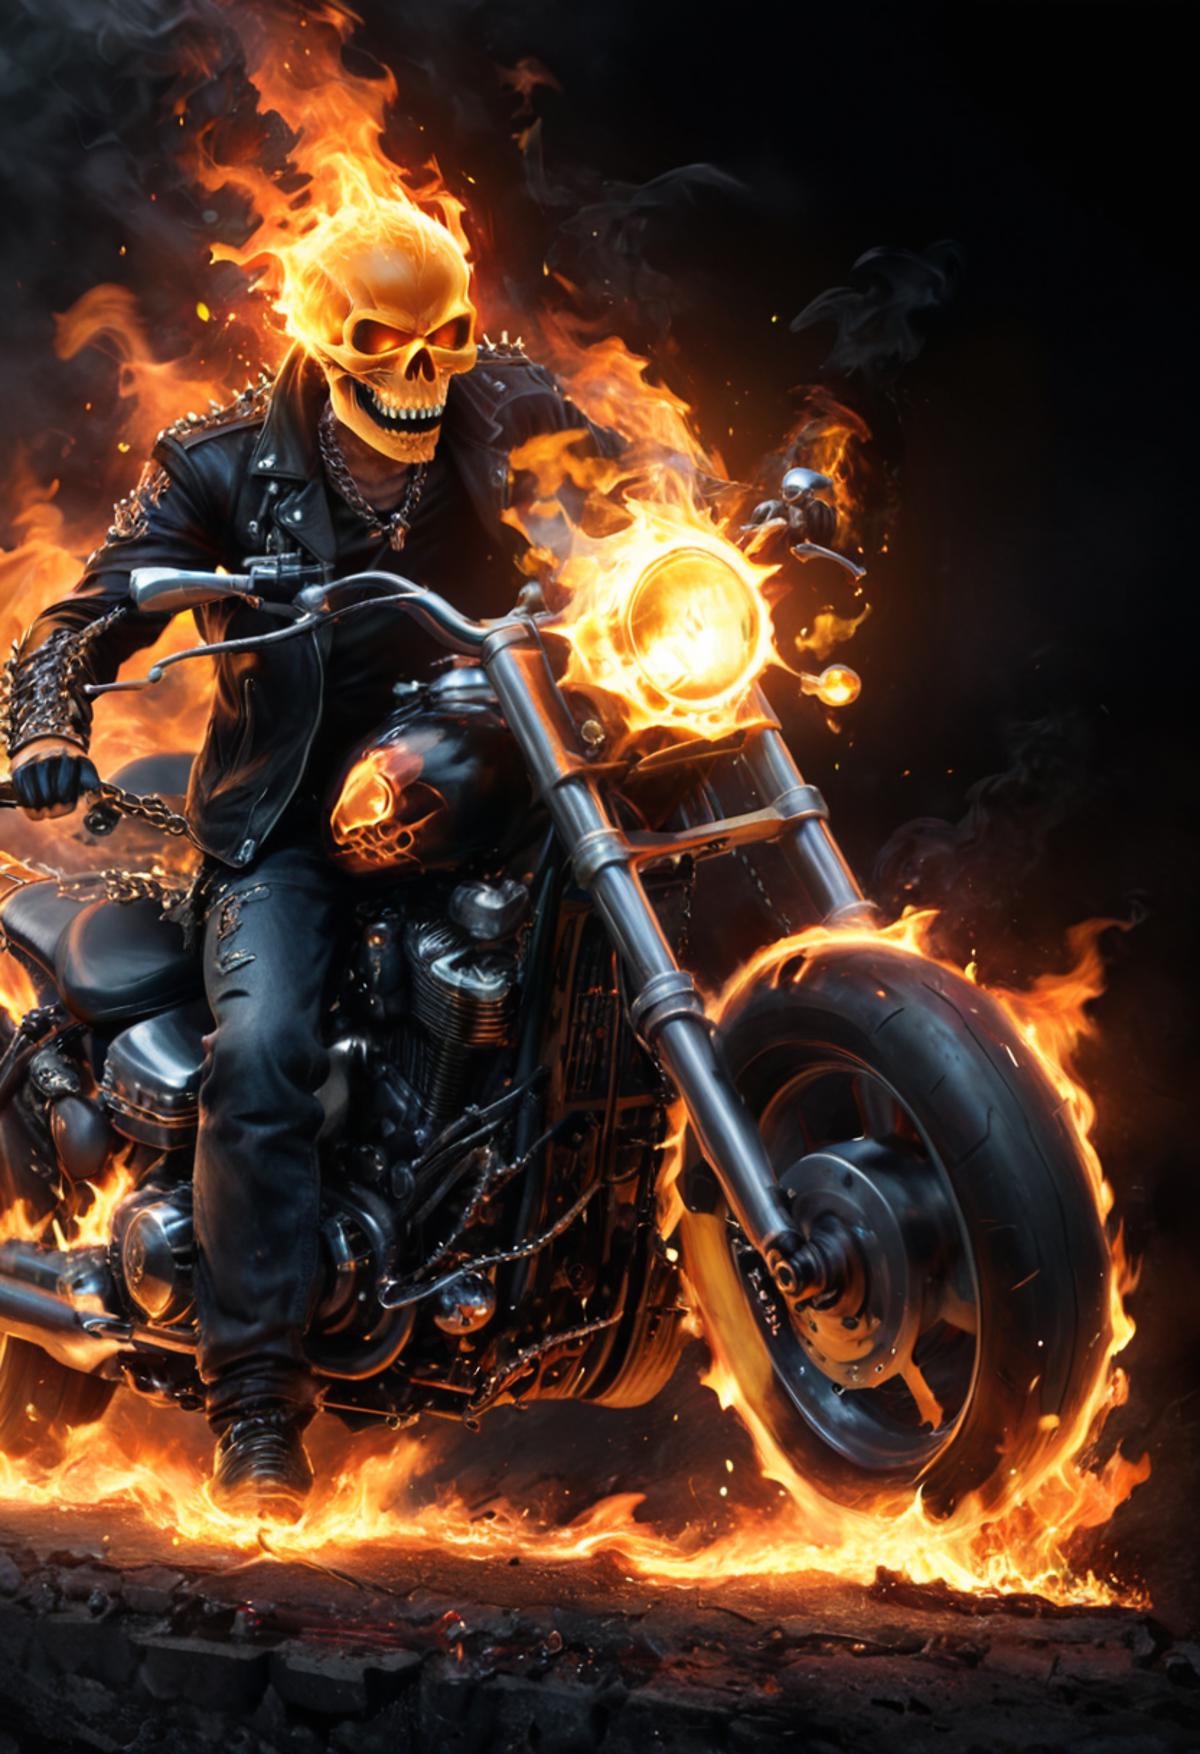 Skull on Flaming Motorcycle with Fire and Steam